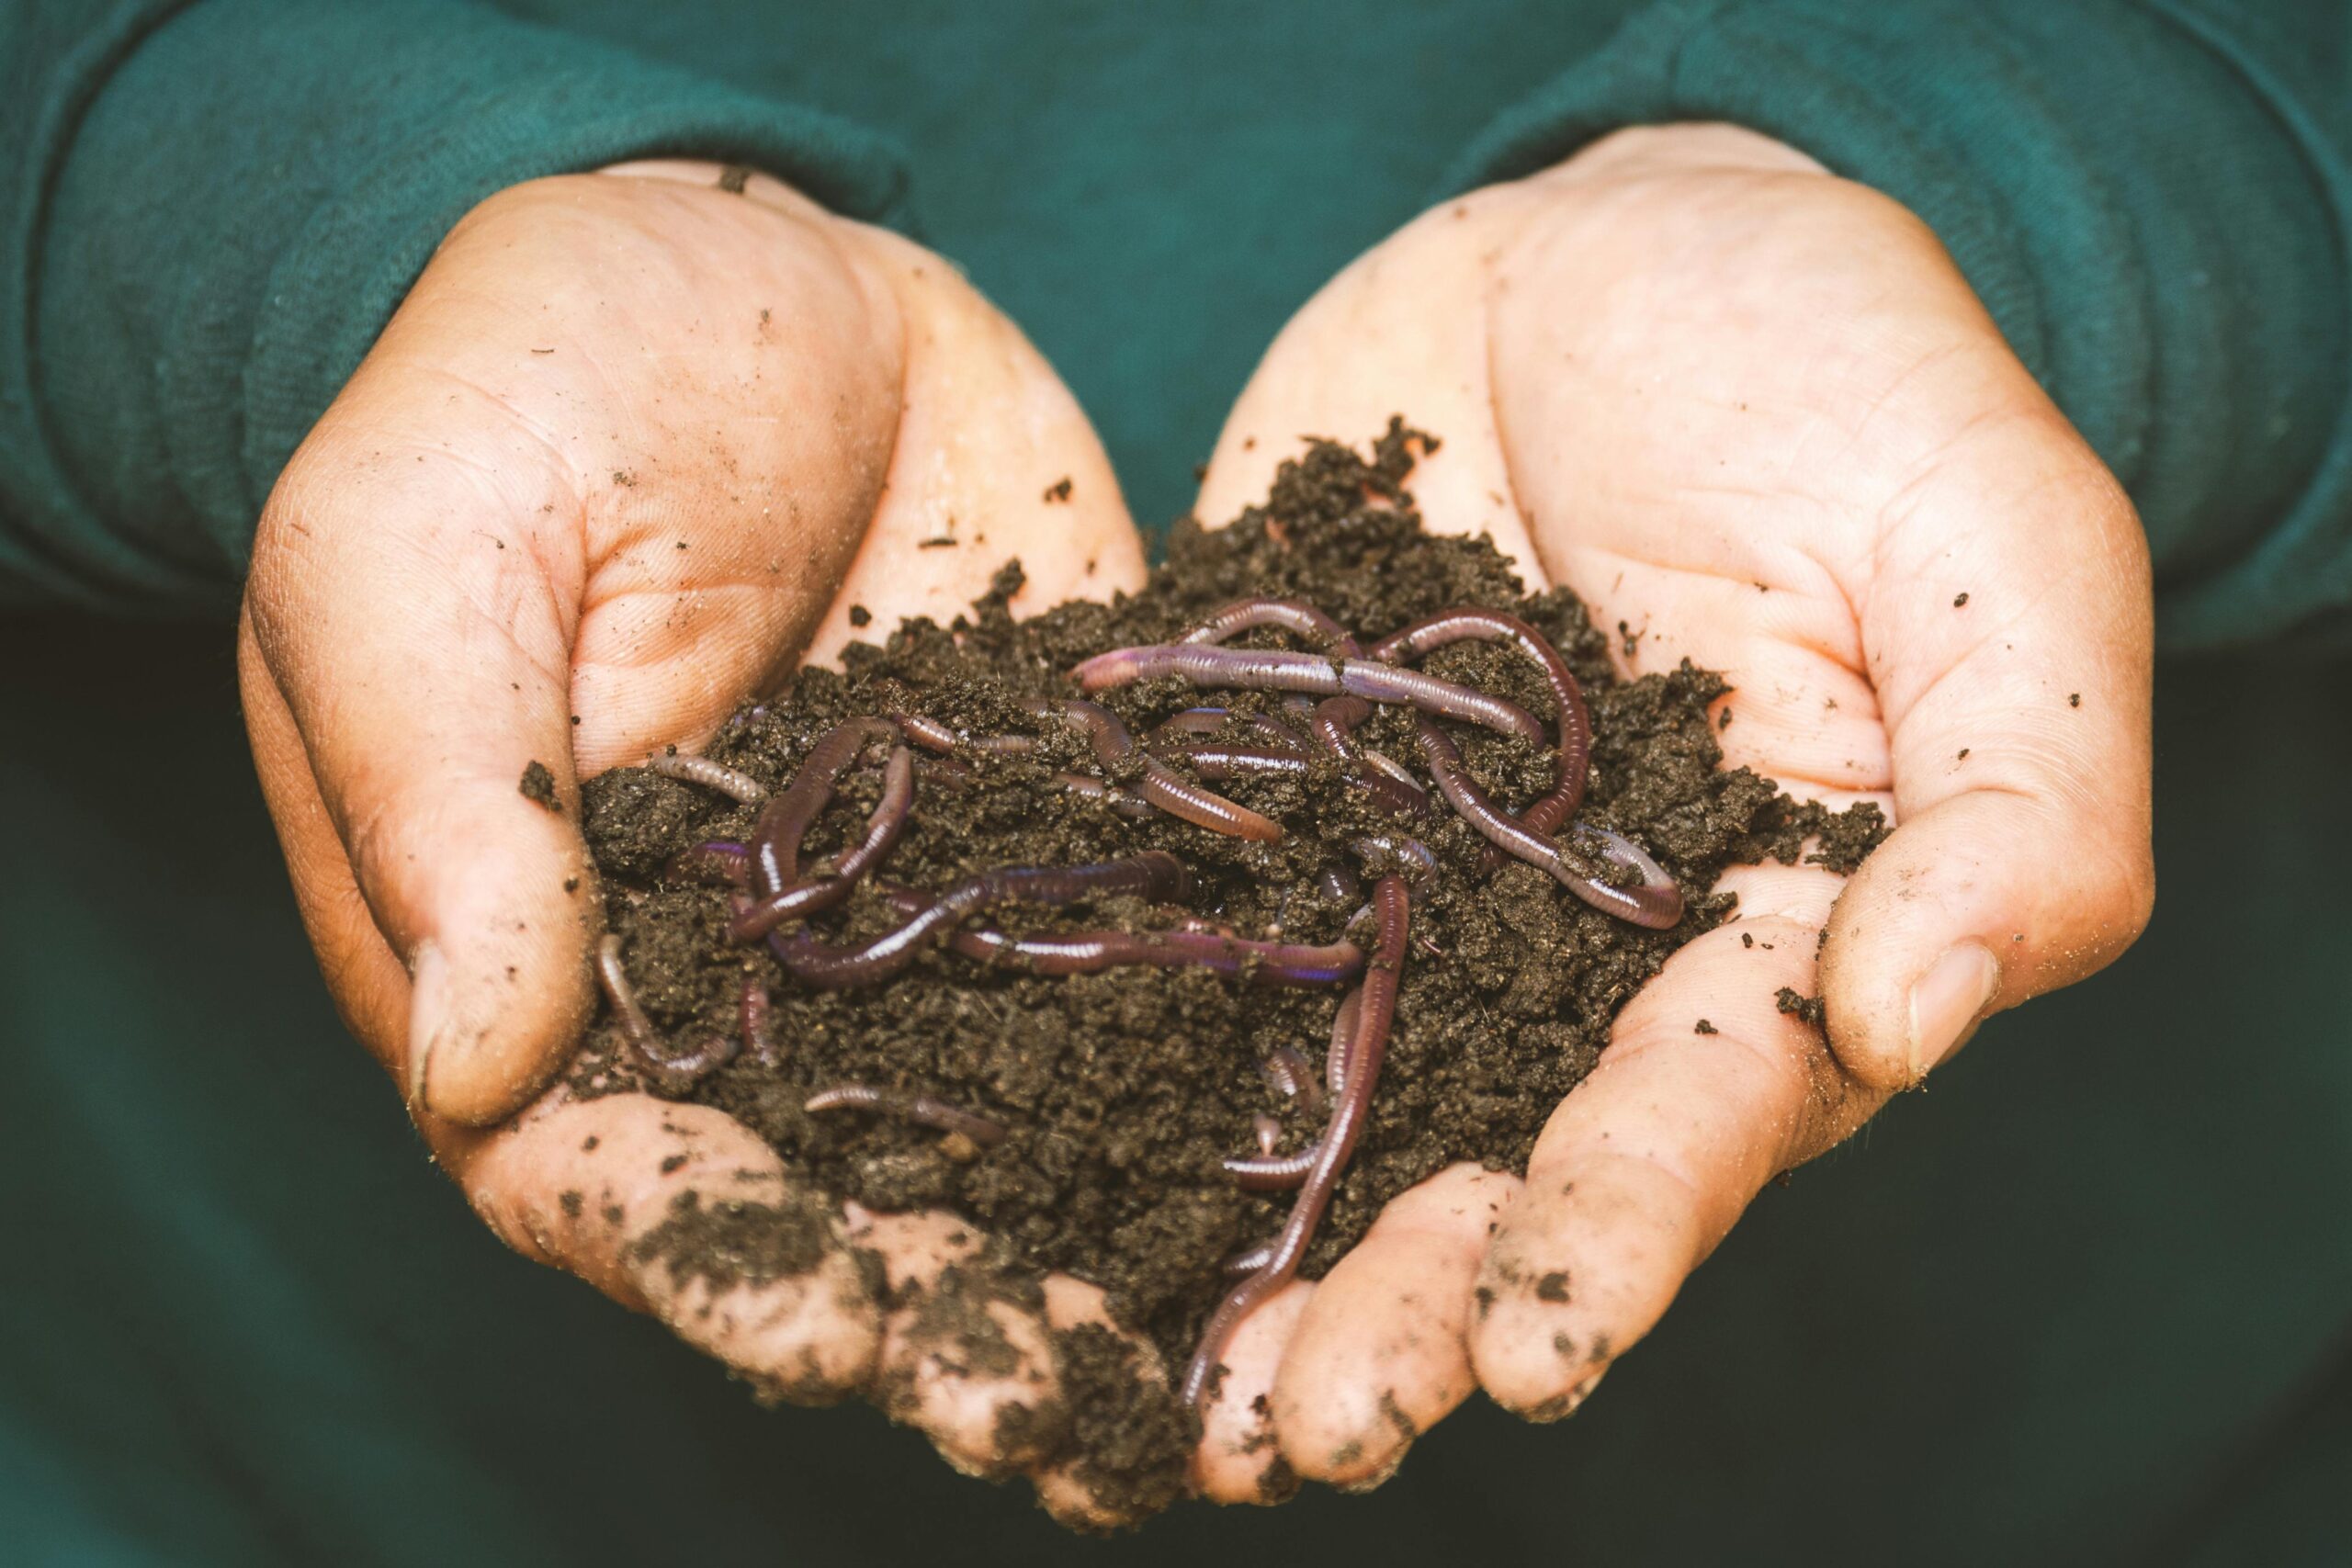 Two hands hold a treasure of compost and earthworms.